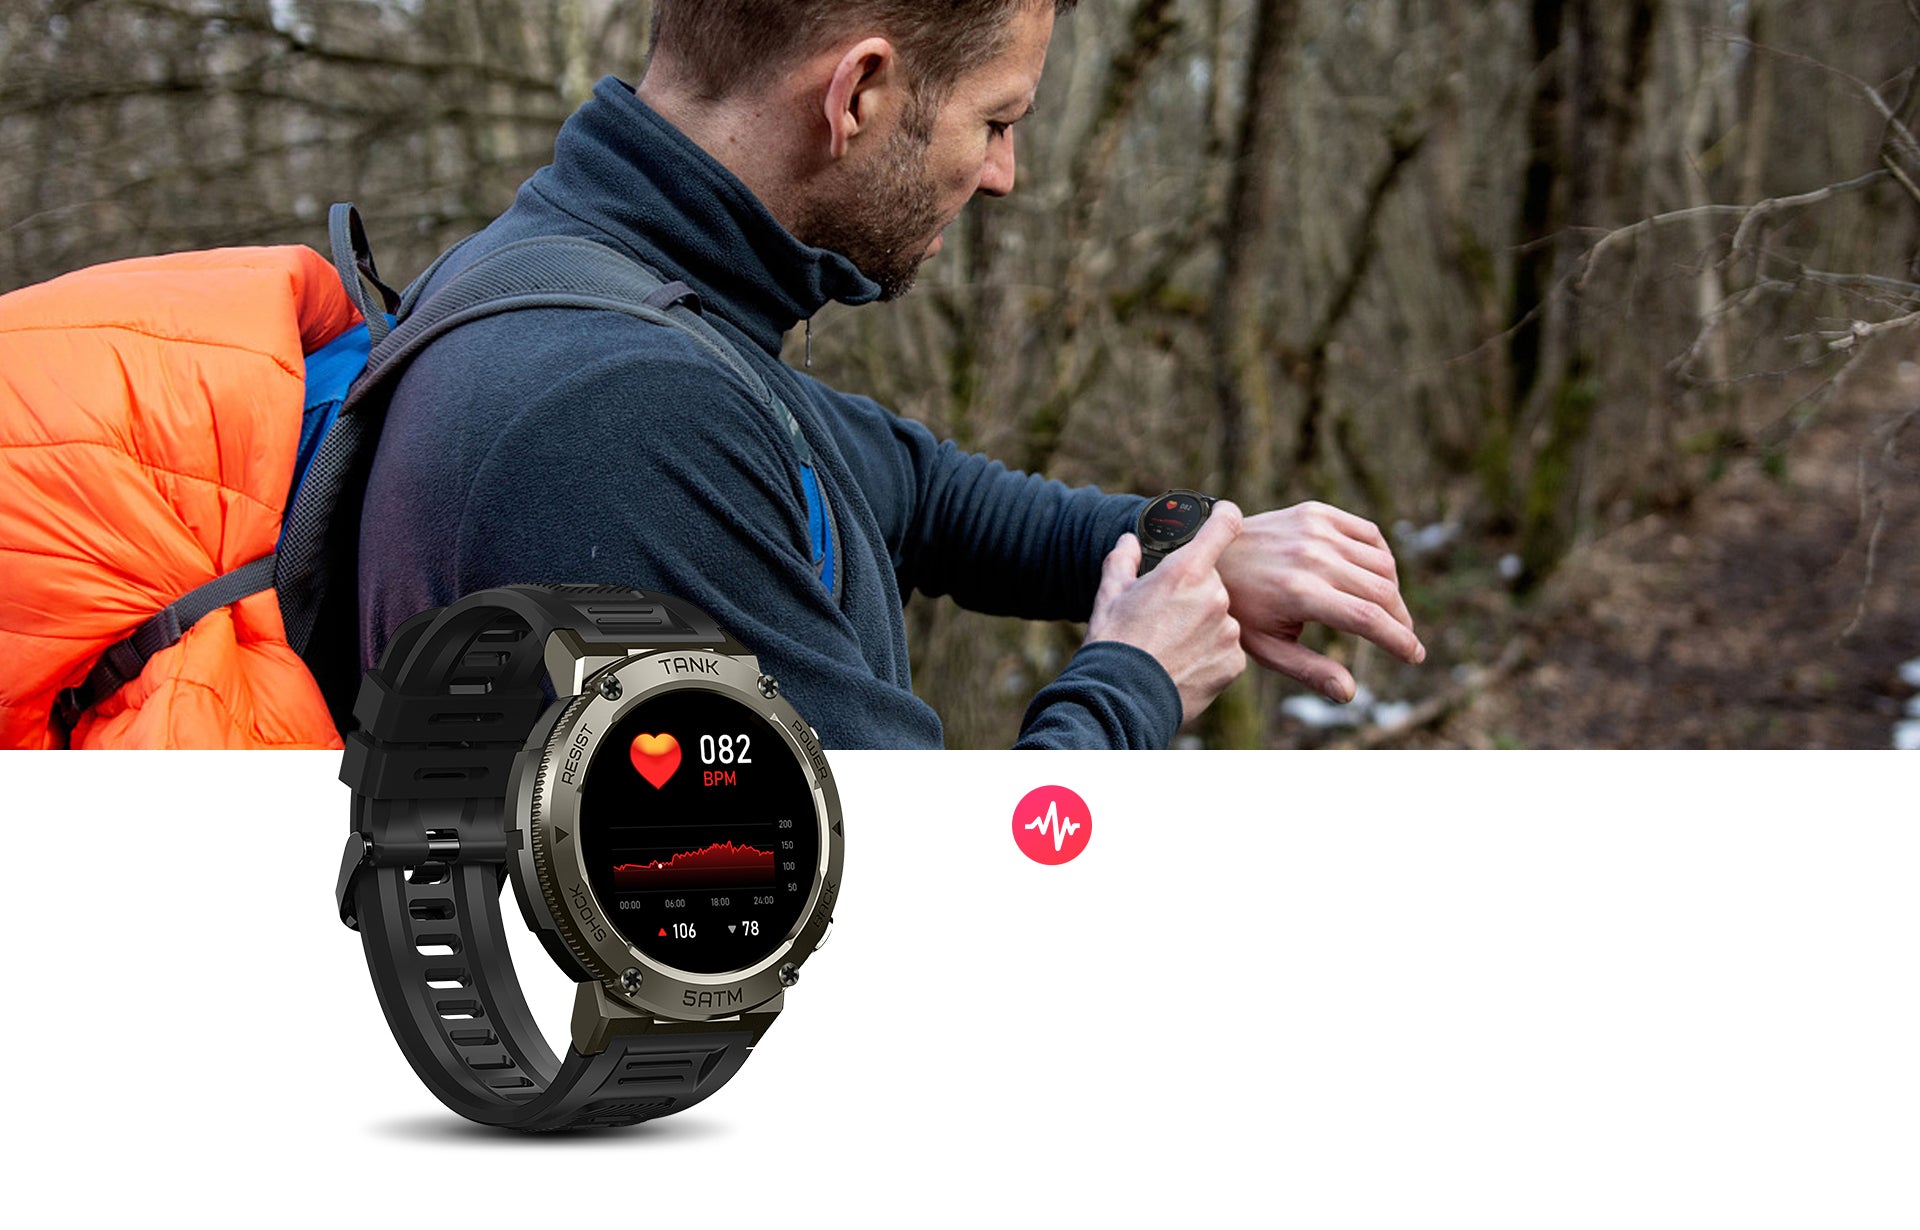 KOSPET TANK T1 PRO Smartwatch support heart rate monitor